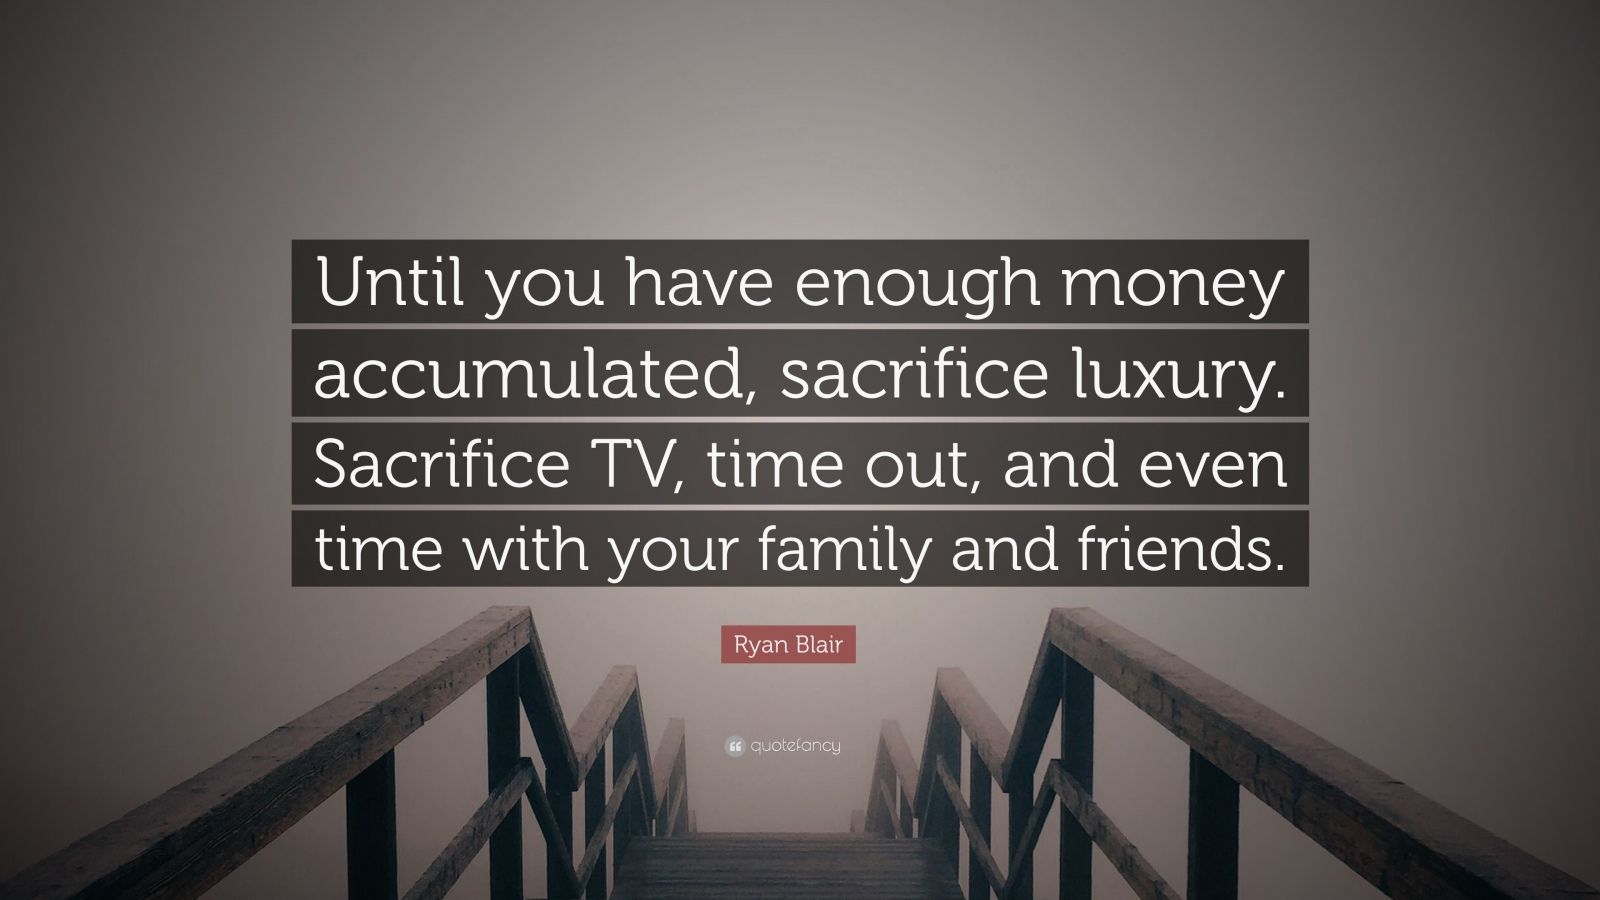 Ryan Blair Quote: “Until you have enough money accumulated, sacrifice  luxury. Sacrifice TV, time out, and even time with your family and fr”